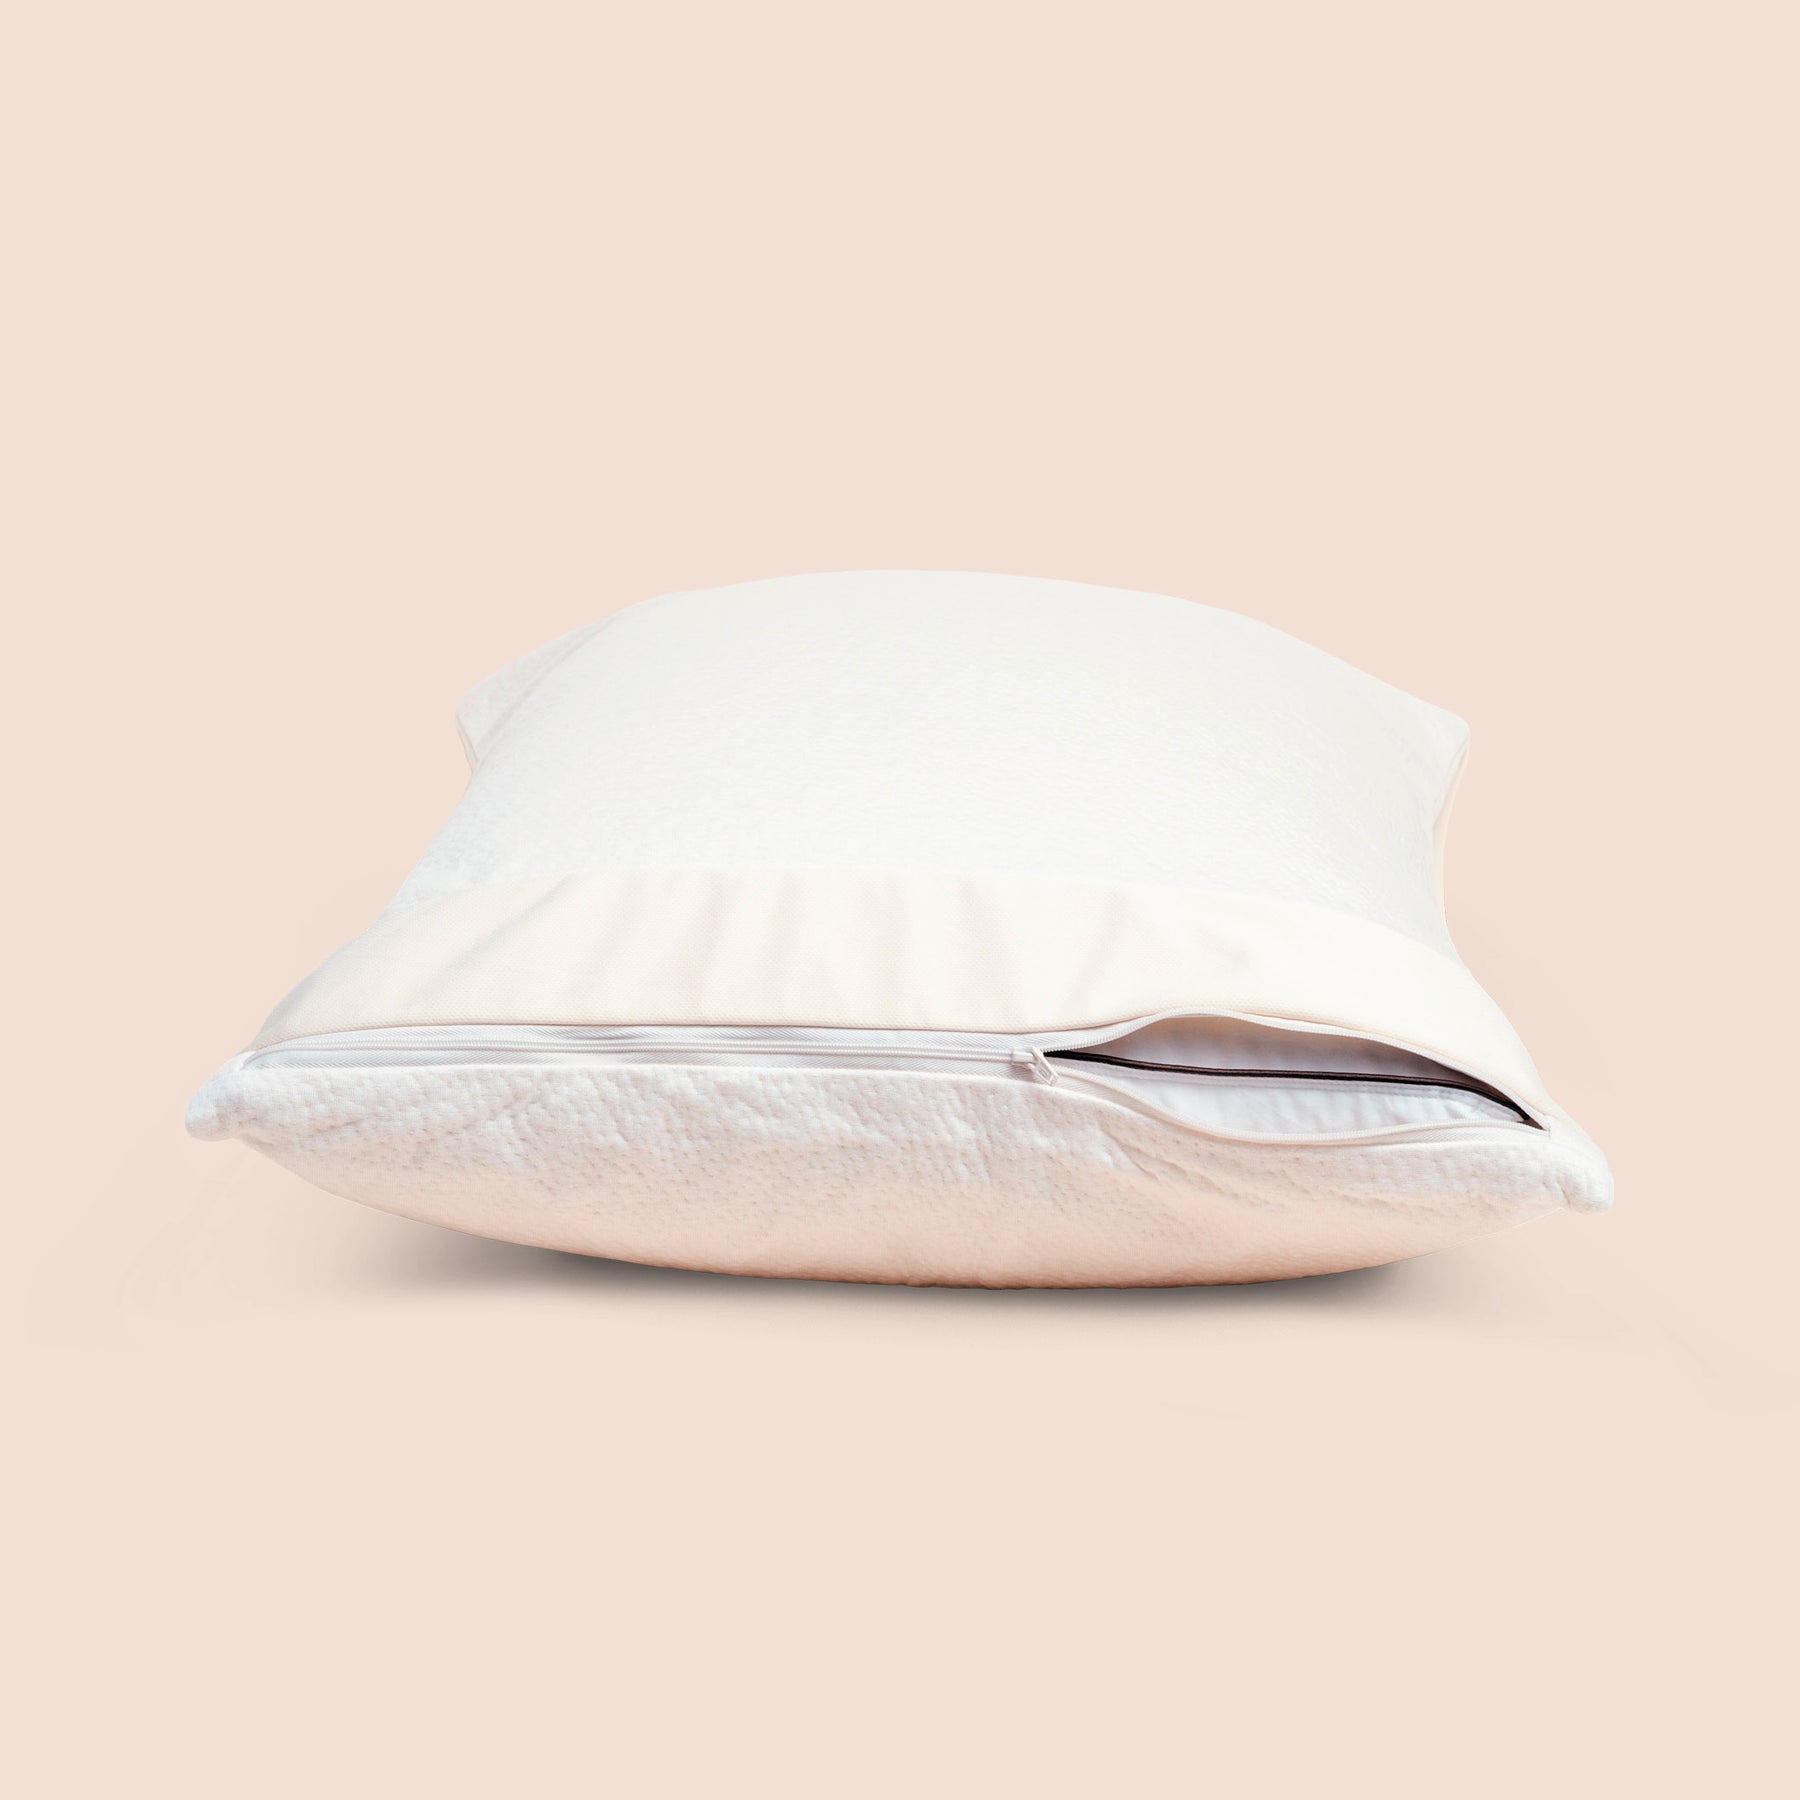 Dr. Weil Signature Pillow Protector